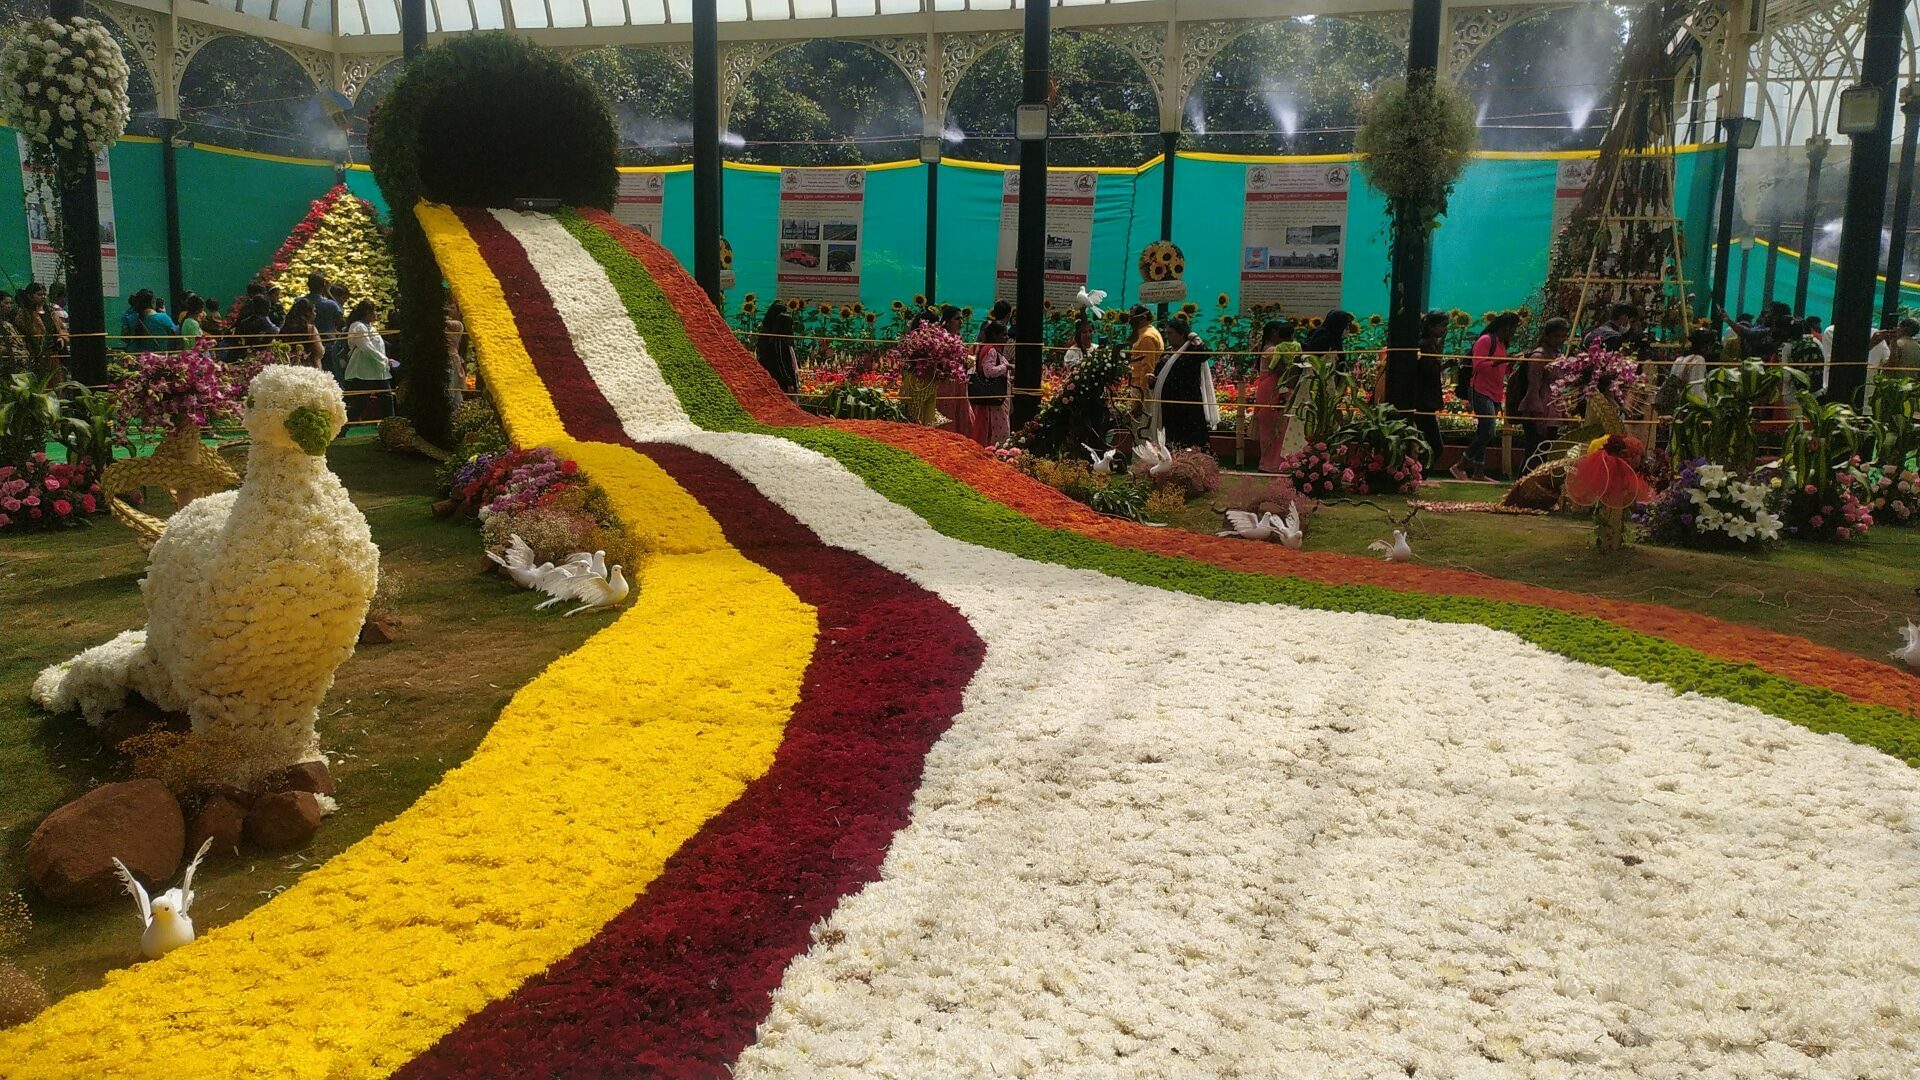 The 213th edition of the iconic Republic Day Lalbagh flower show is a must see!